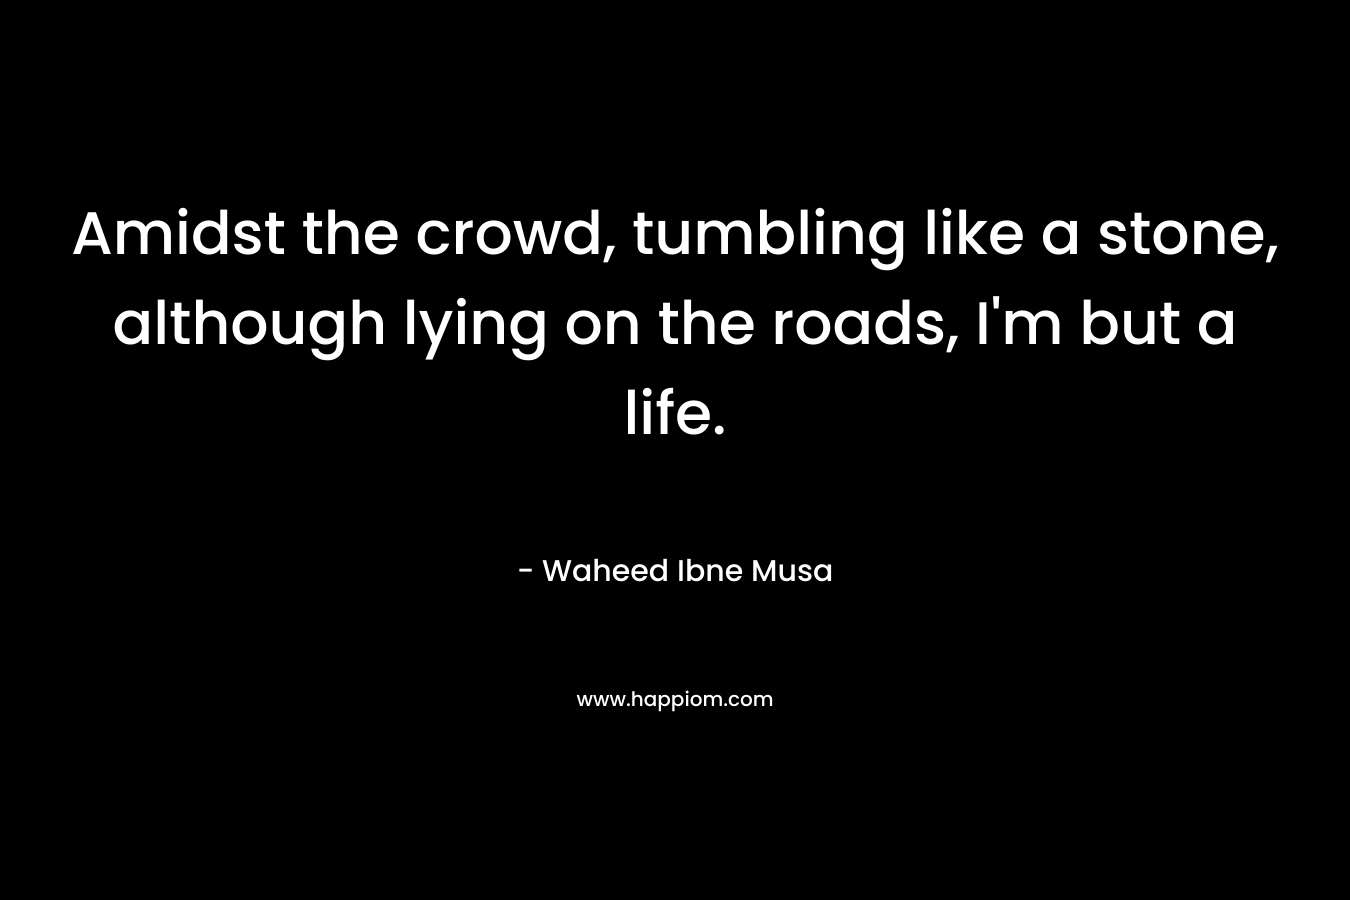 Amidst the crowd, tumbling like a stone, although lying on the roads, I’m but a life. – Waheed Ibne Musa